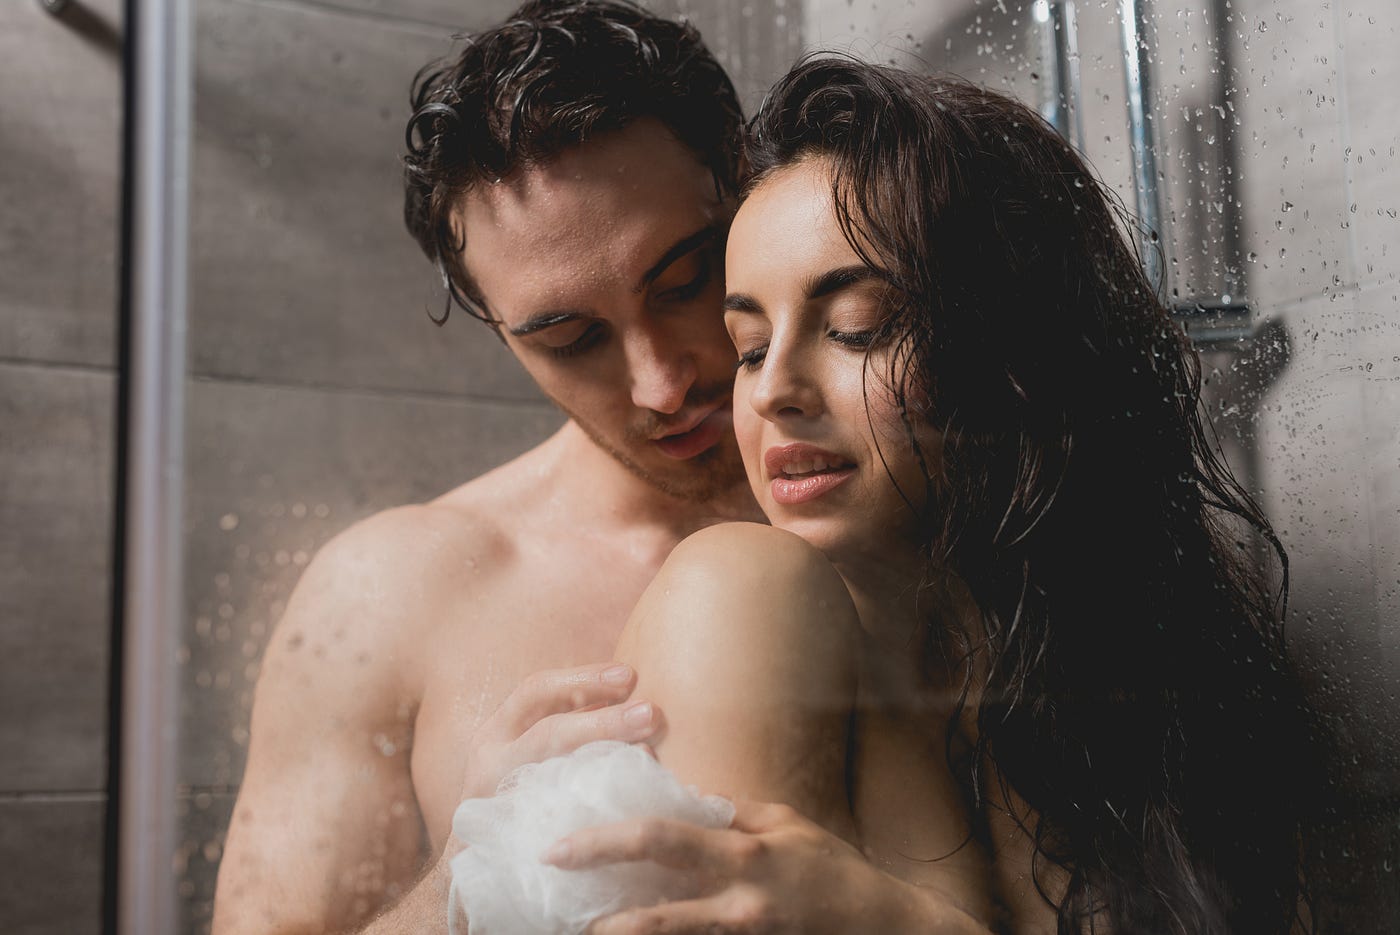 3 Reasons to Try Showering With Your Partner Enjoy this wet path to intimacy Sex…With a Side of Quirk image picture